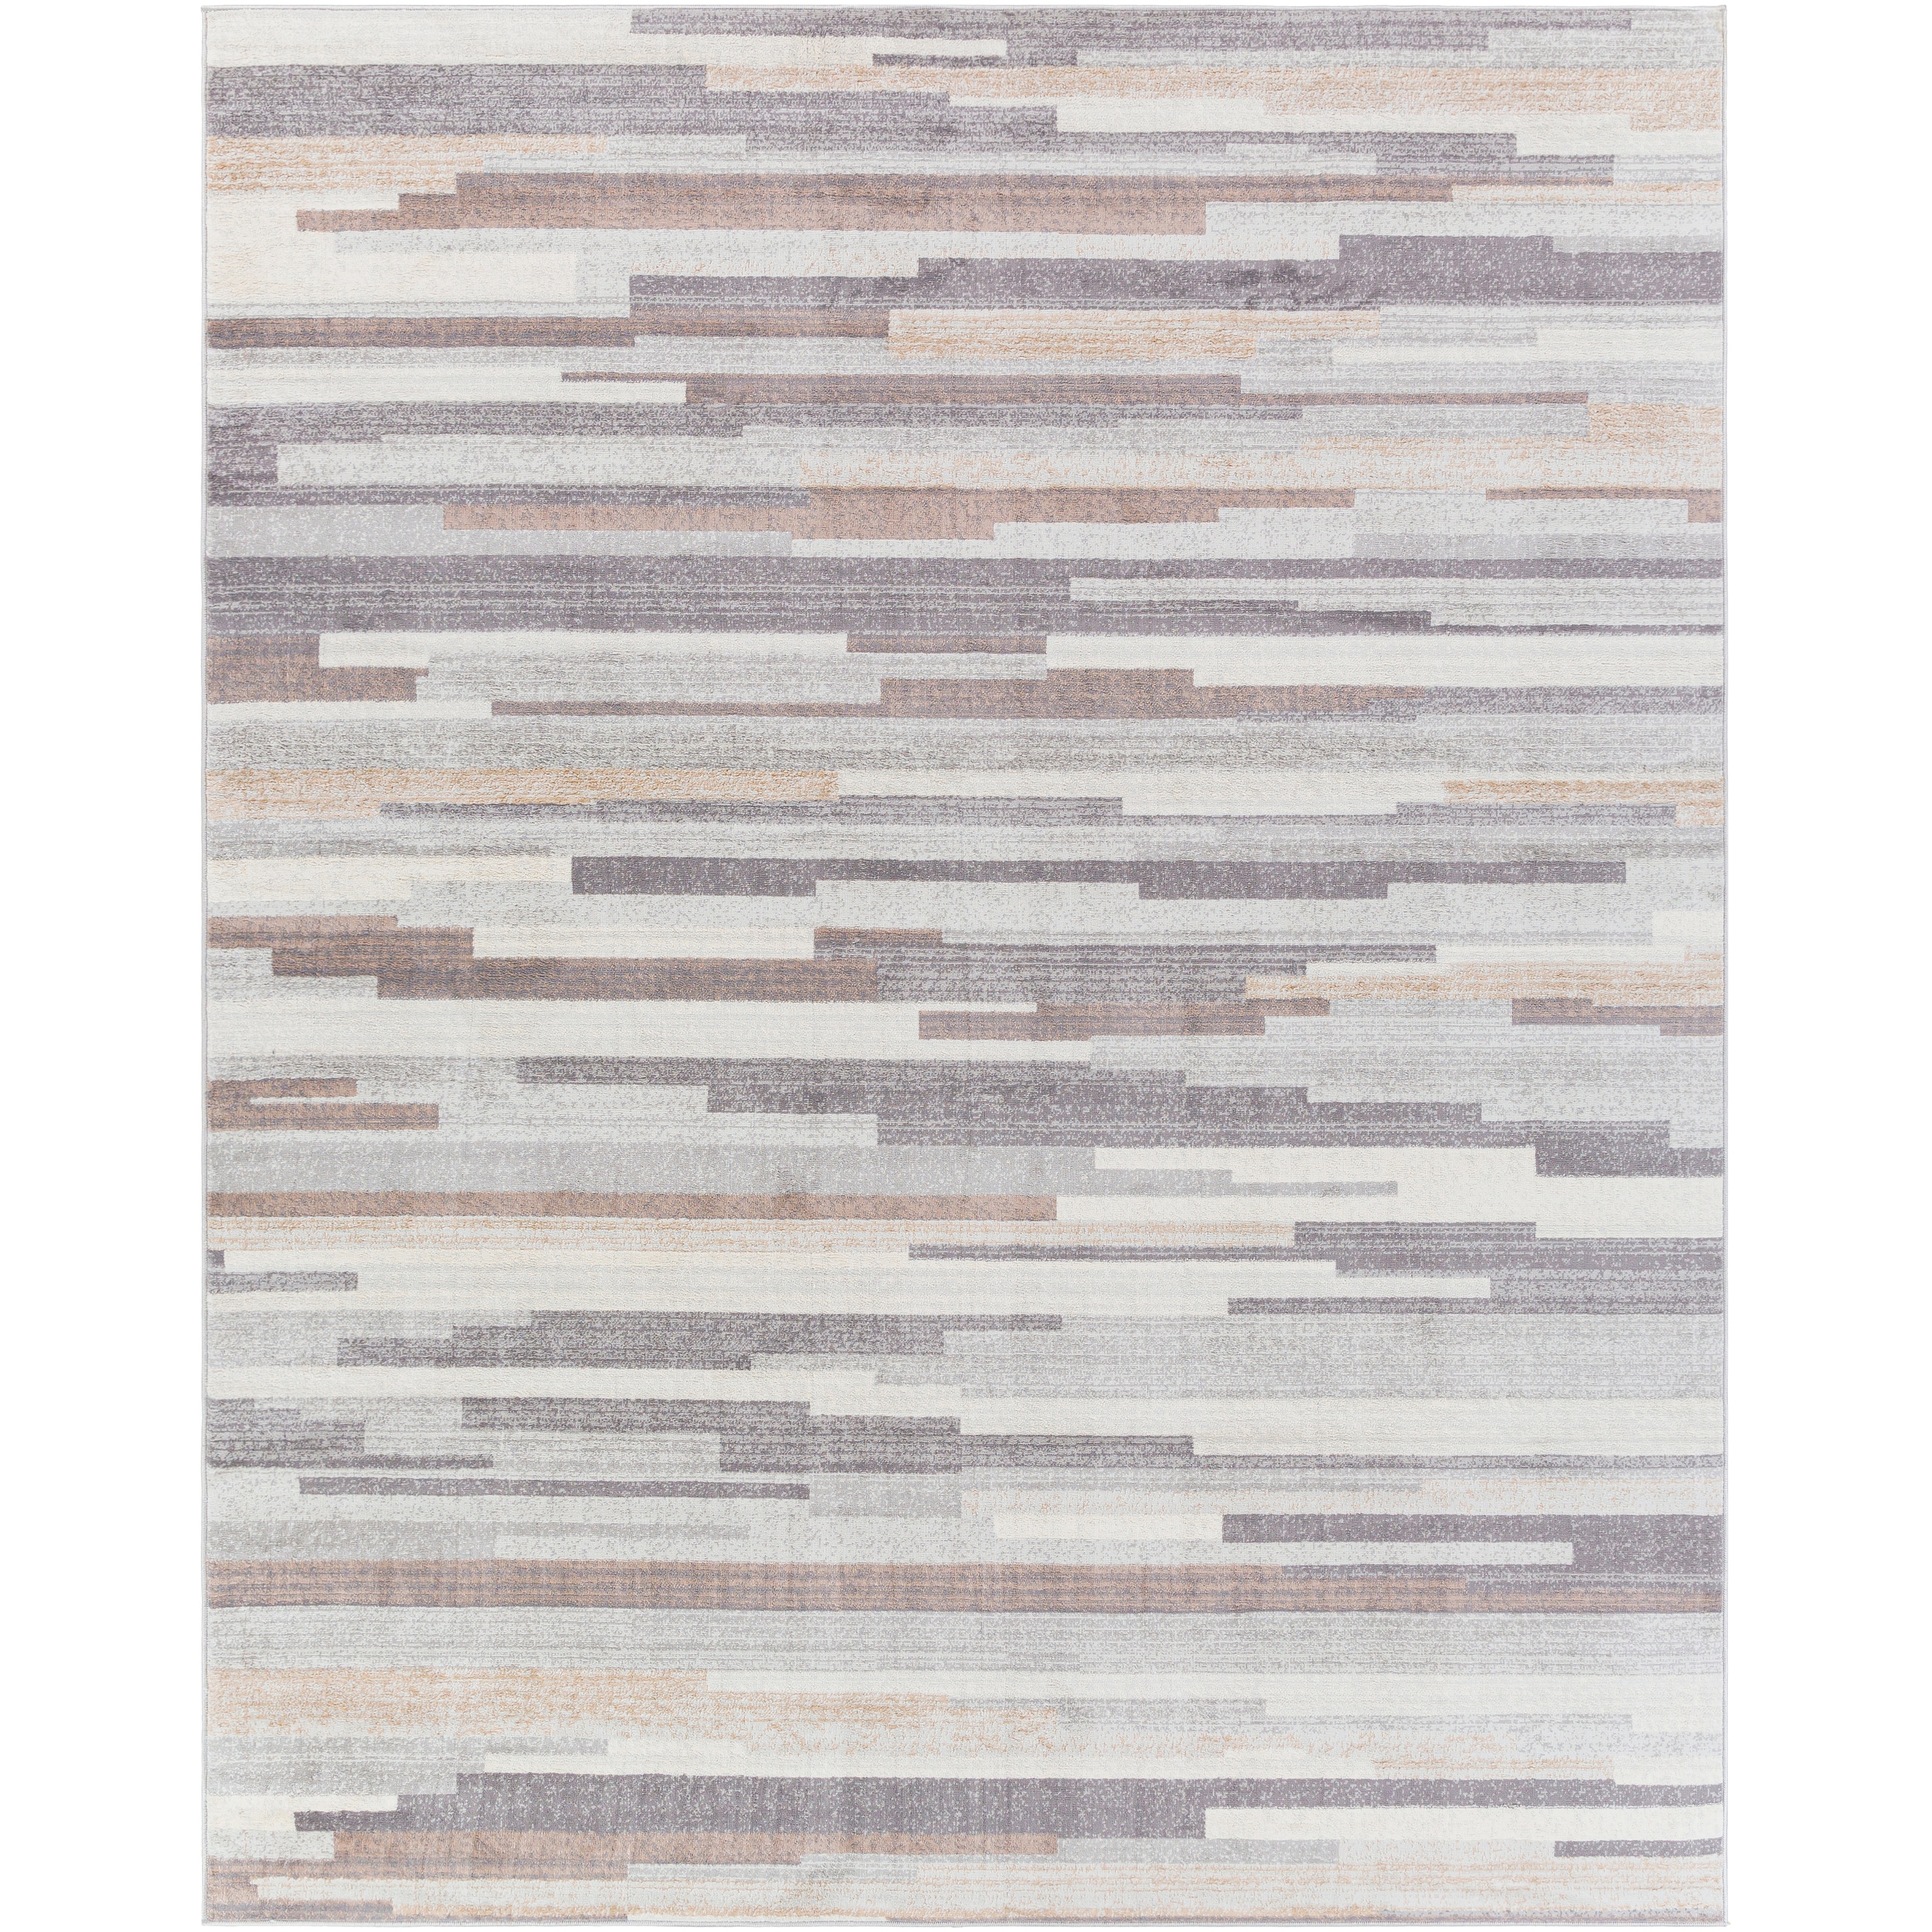 https://ak1.ostkcdn.com/images/products/is/images/direct/afba6fcb4c39dbe144bf15c38a30b4f17a3aeb74/Moe-Striped-Area-Rug.jpg